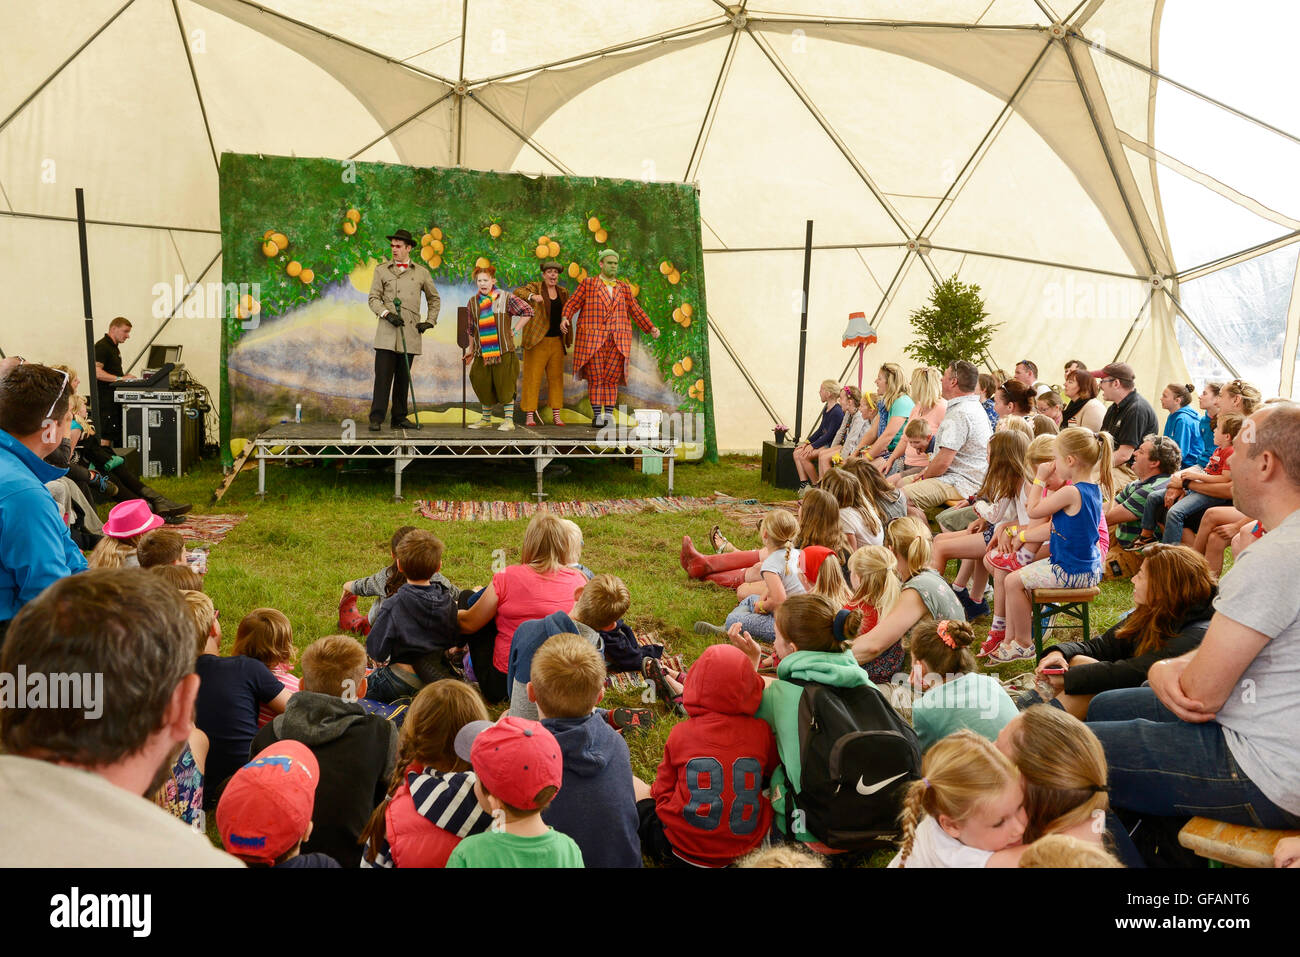 Carfest North, Bolesworth, Cheshire, UK. 30th July 2016. A play being performed in the Culture Club tent. The event is the brainchild of Chris Evans and features 3 days of cars, music and entertainment with profits being donated to the charity Children in Need. Andrew Paterson/Alamy Live News Stock Photo